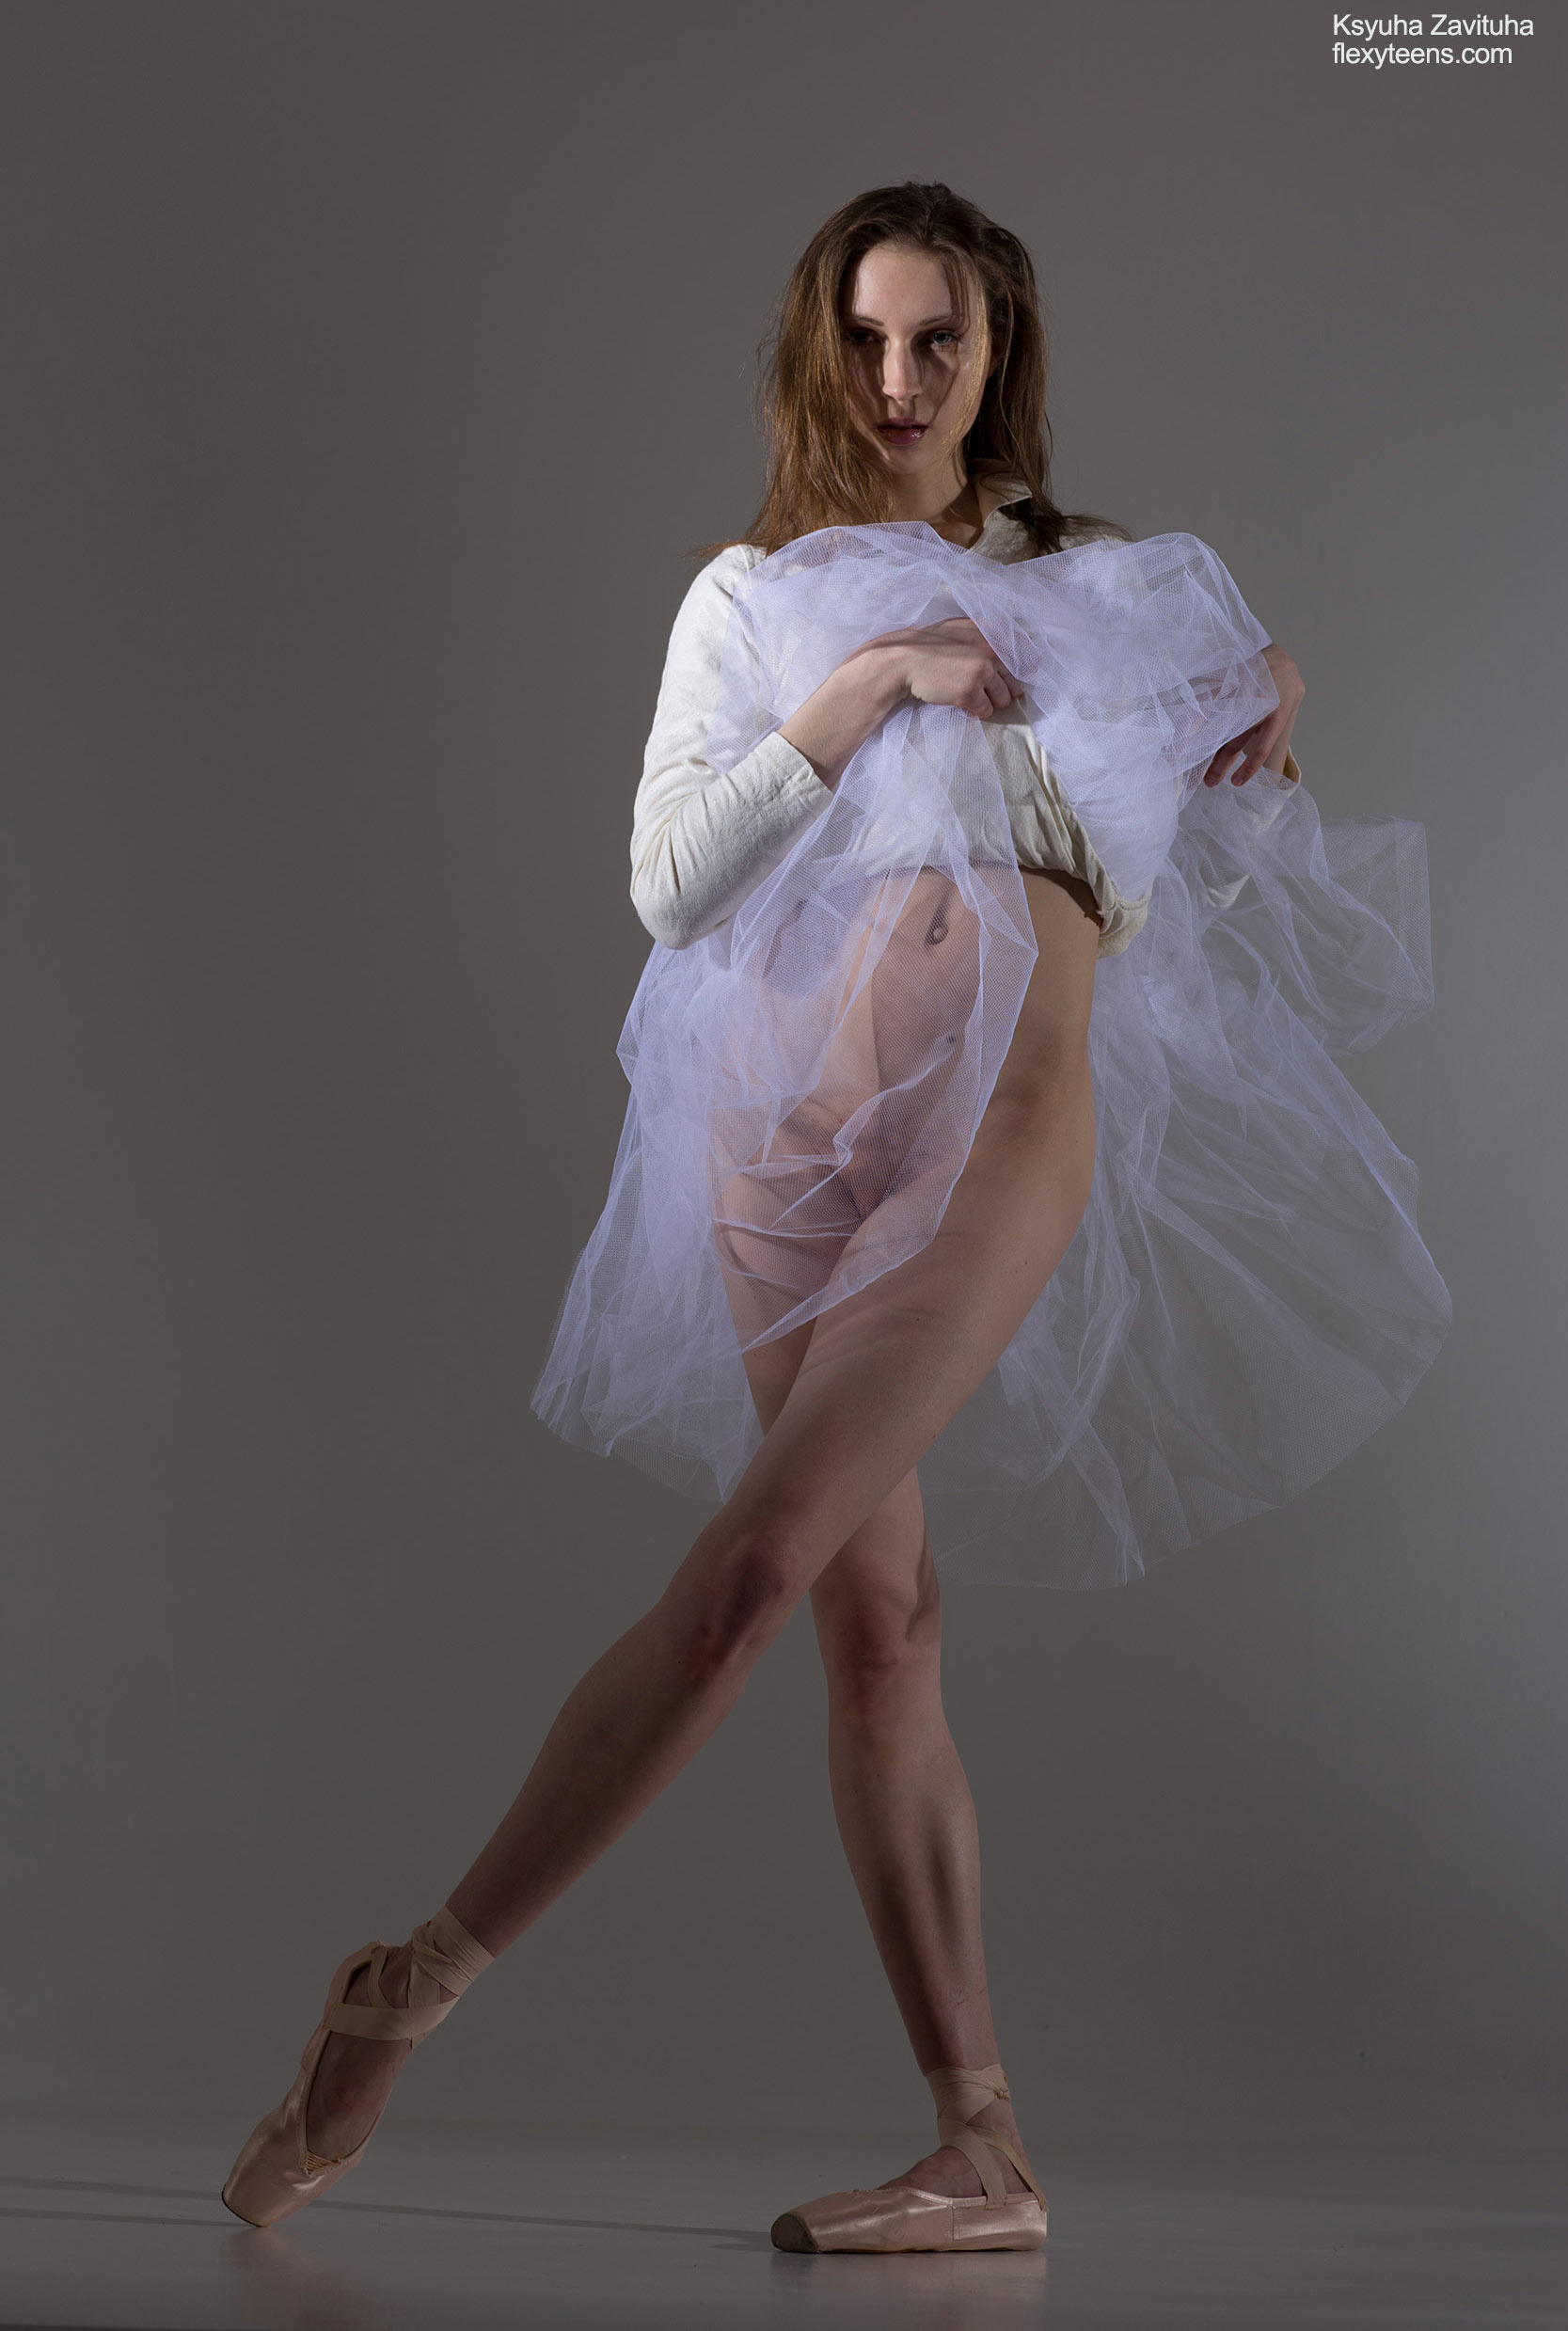 Ballet In The Nude 13